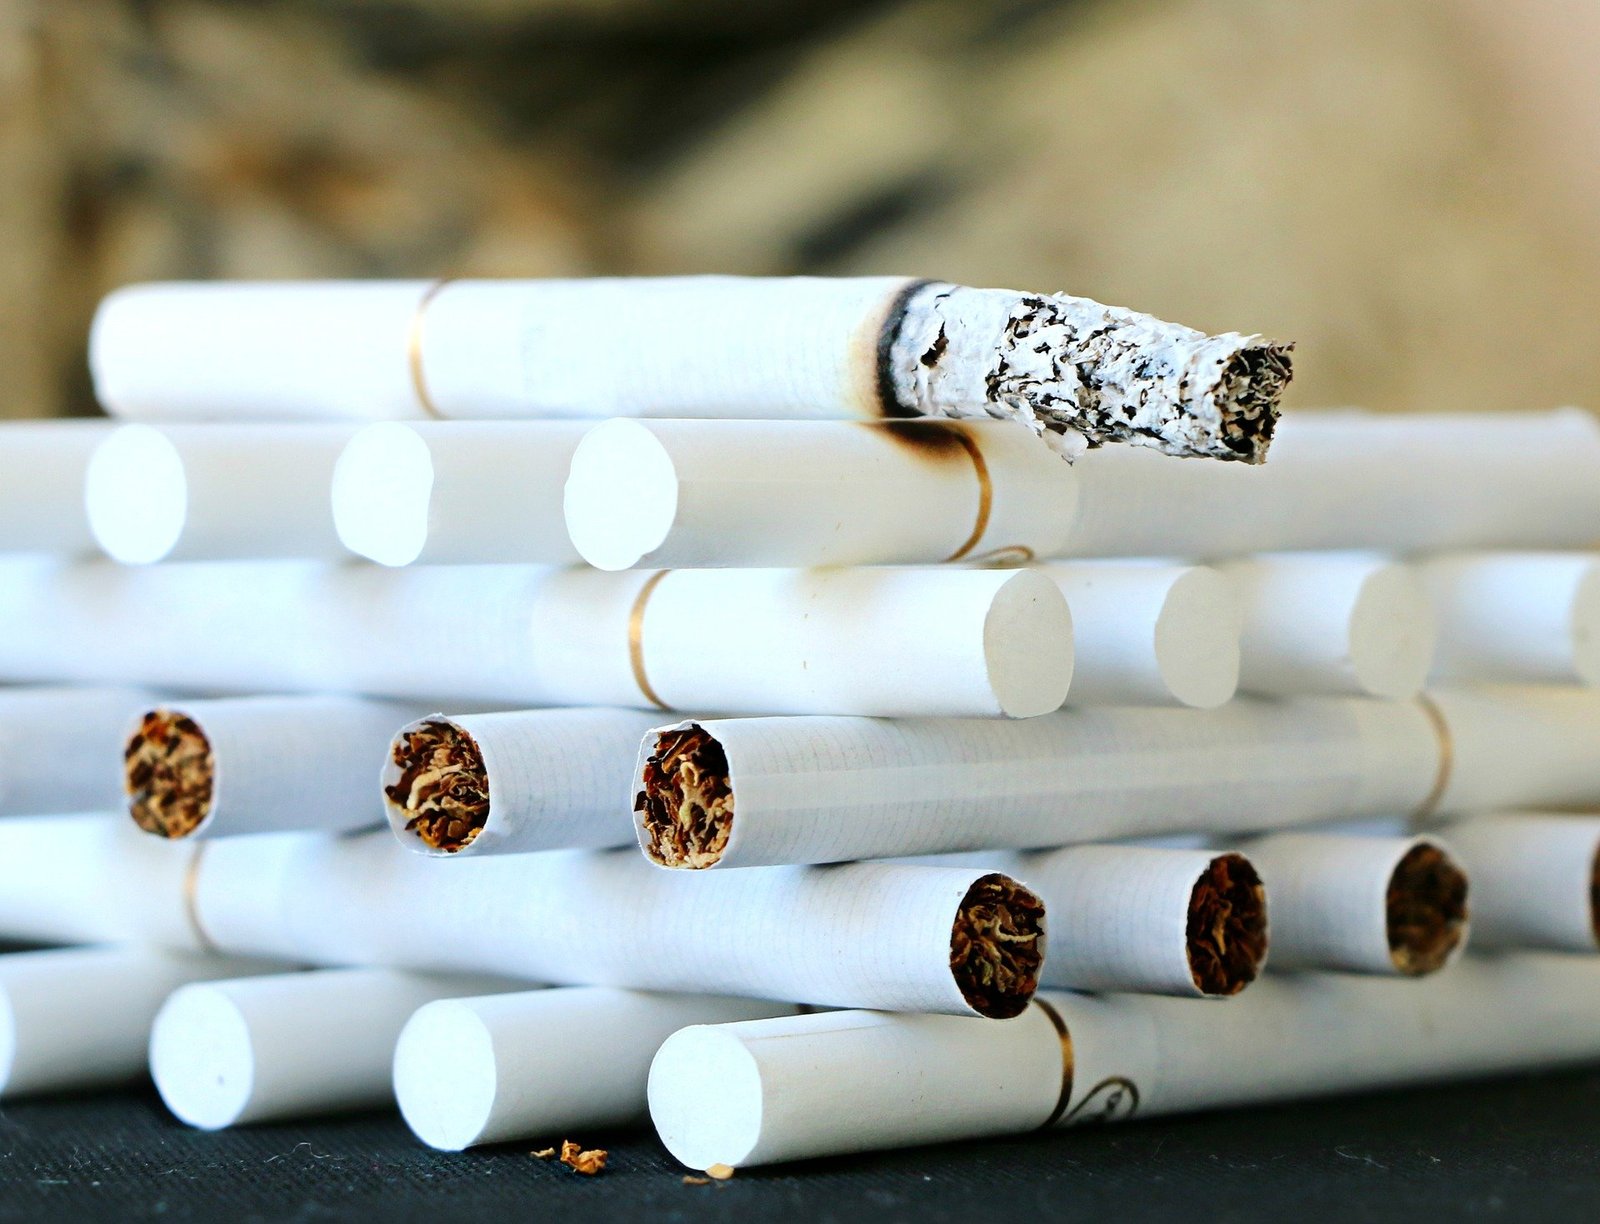 Panama to host anti-tobacco talks as industry courts new, younger smokers